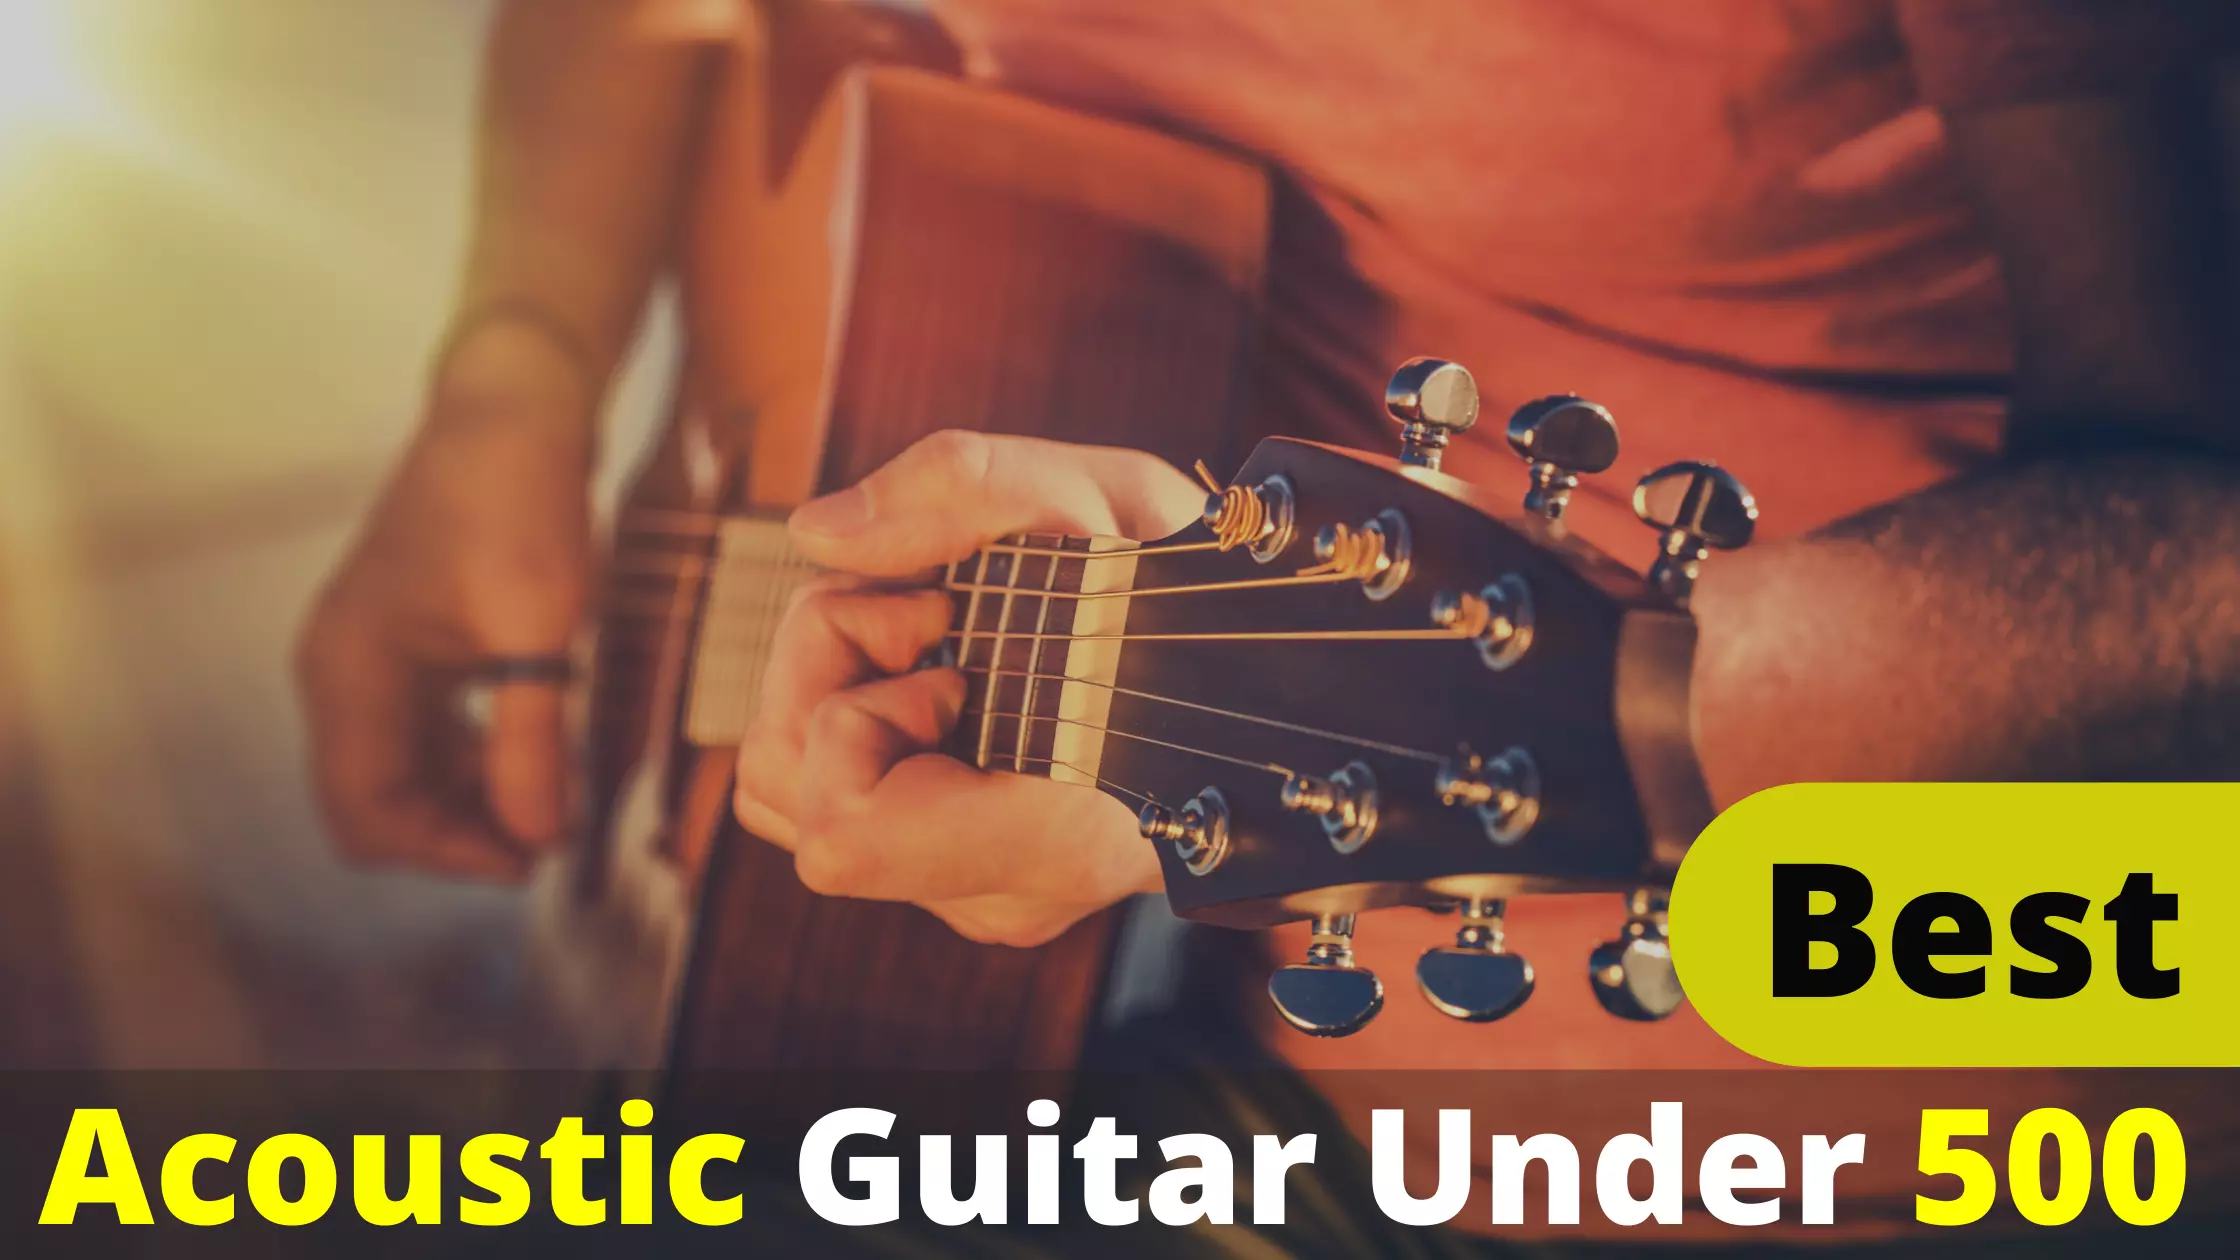 Top 10 Best Acoustic Guitar Under 500 Reviews and Buying Guide 2022